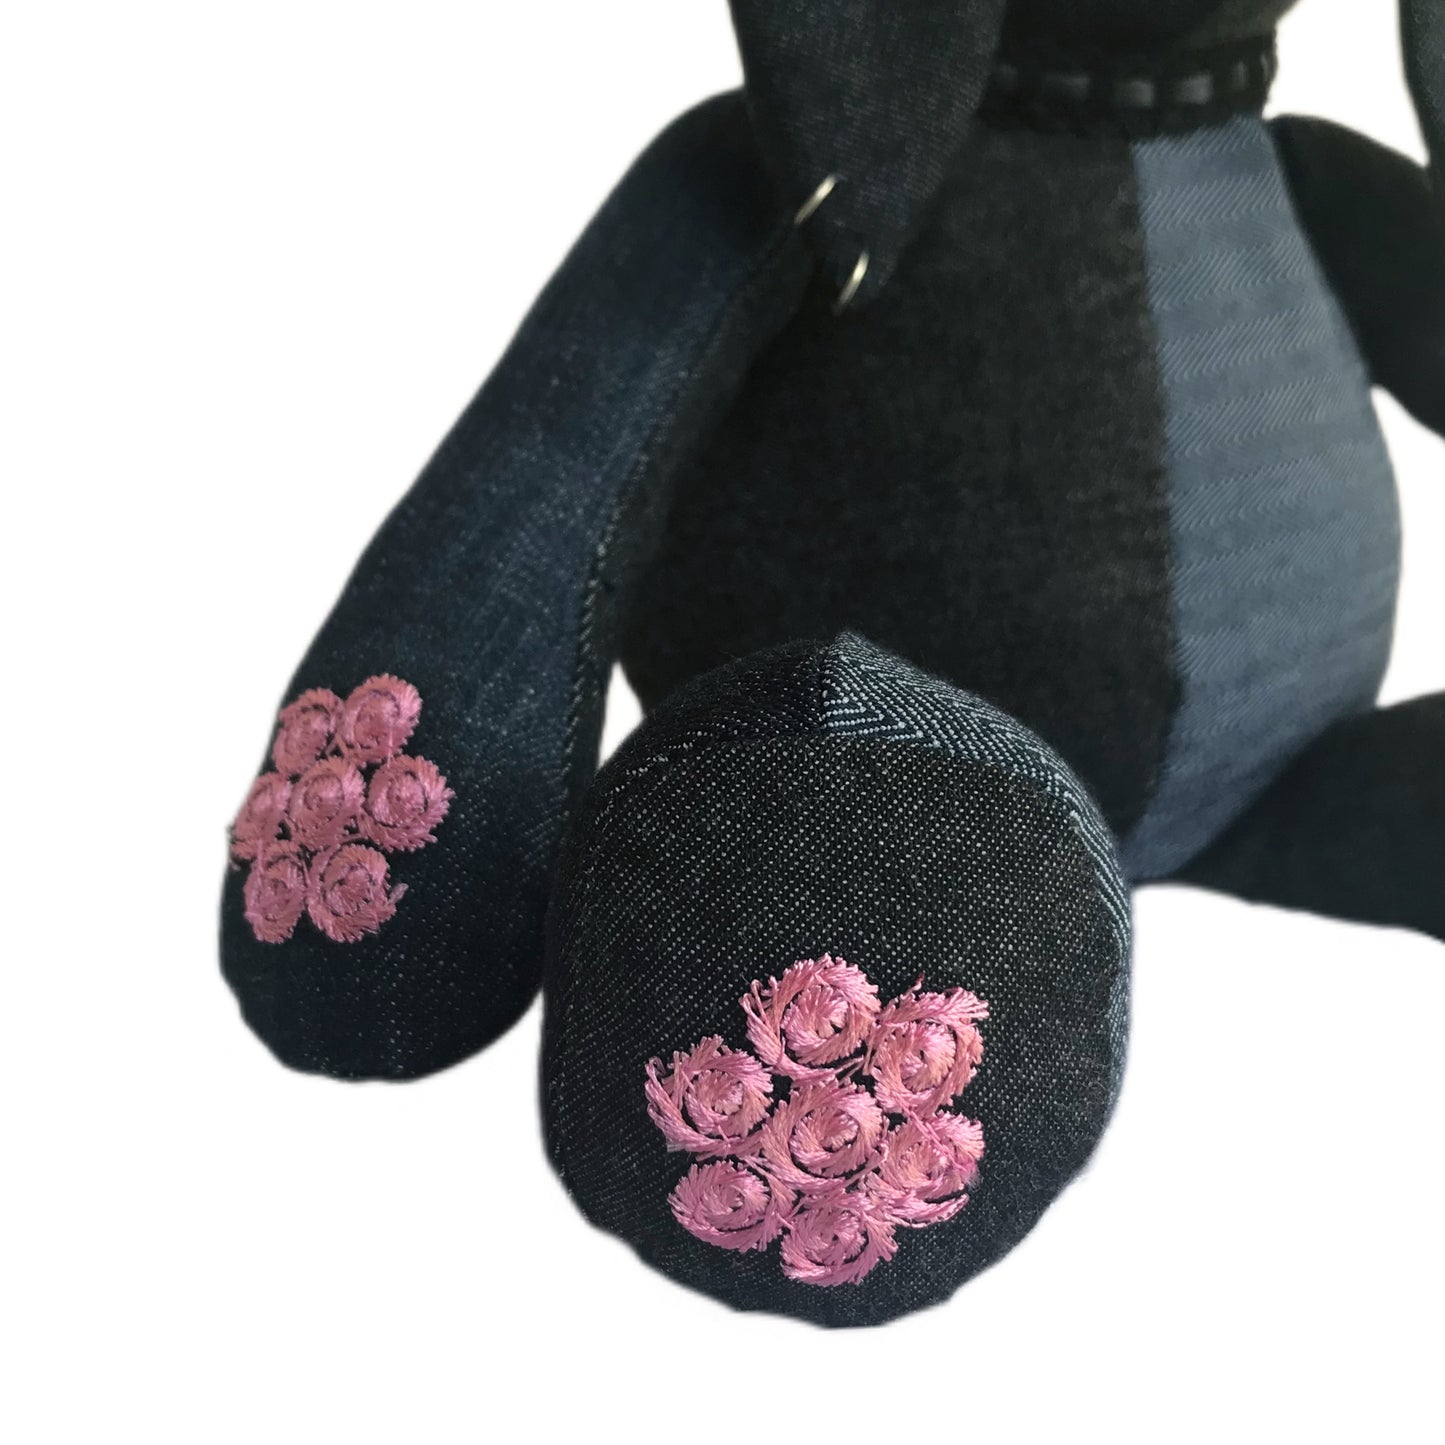 Blossom Bunny - Made from Recycle Denim Jeans